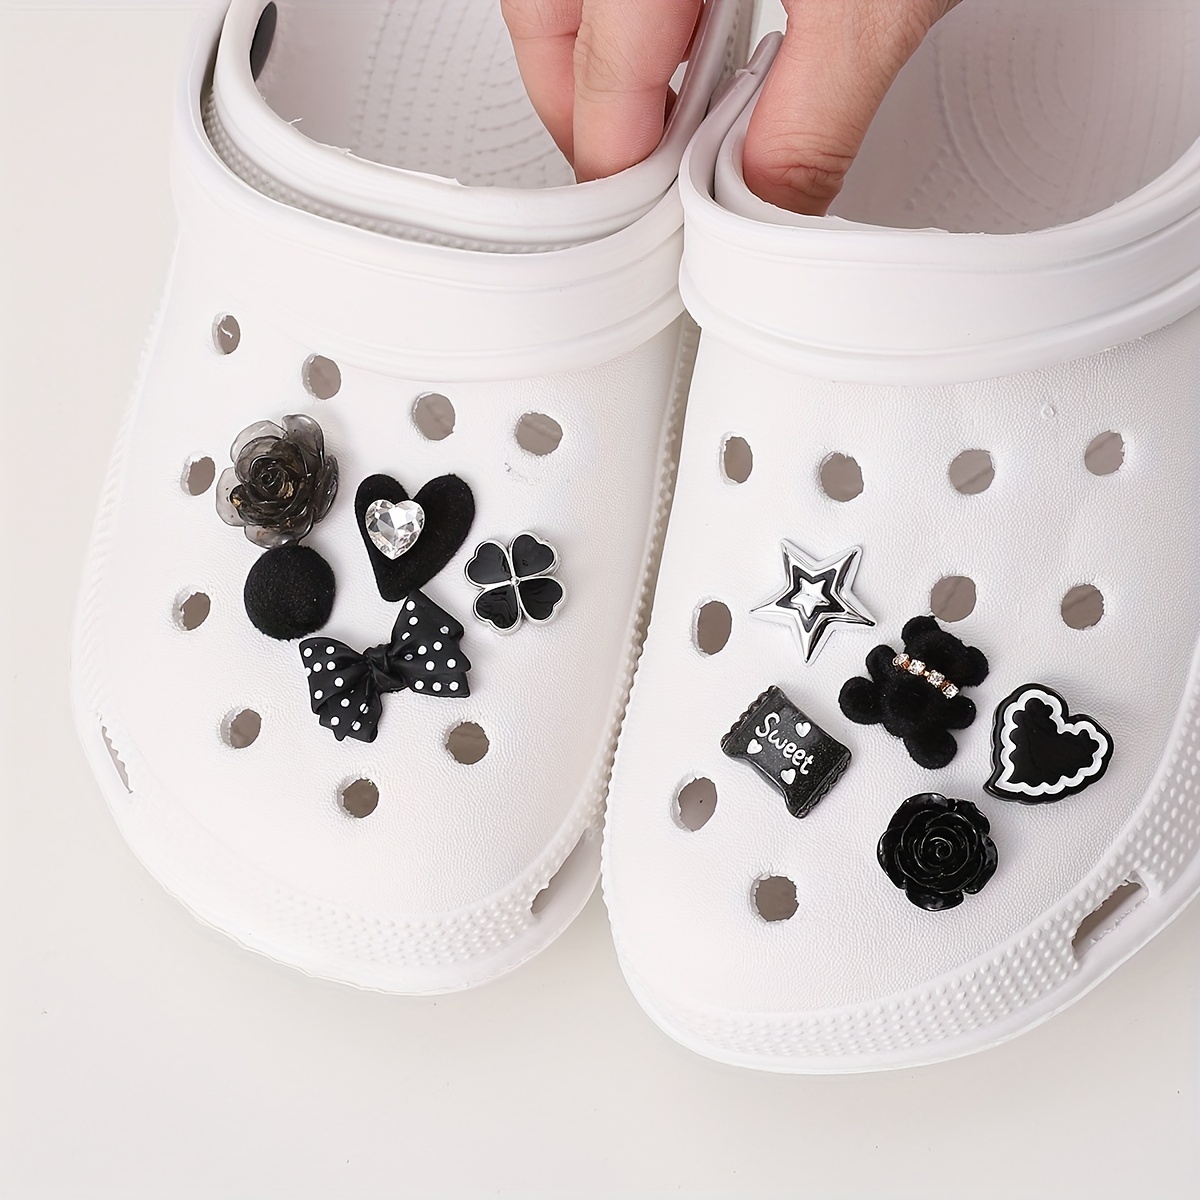 10Pcs Sanrio Series Shoe Charms DIY Shoe Flower Kuromi Melody Accessories  Decorations Sandals Decorate for Crocs Kids Gifts